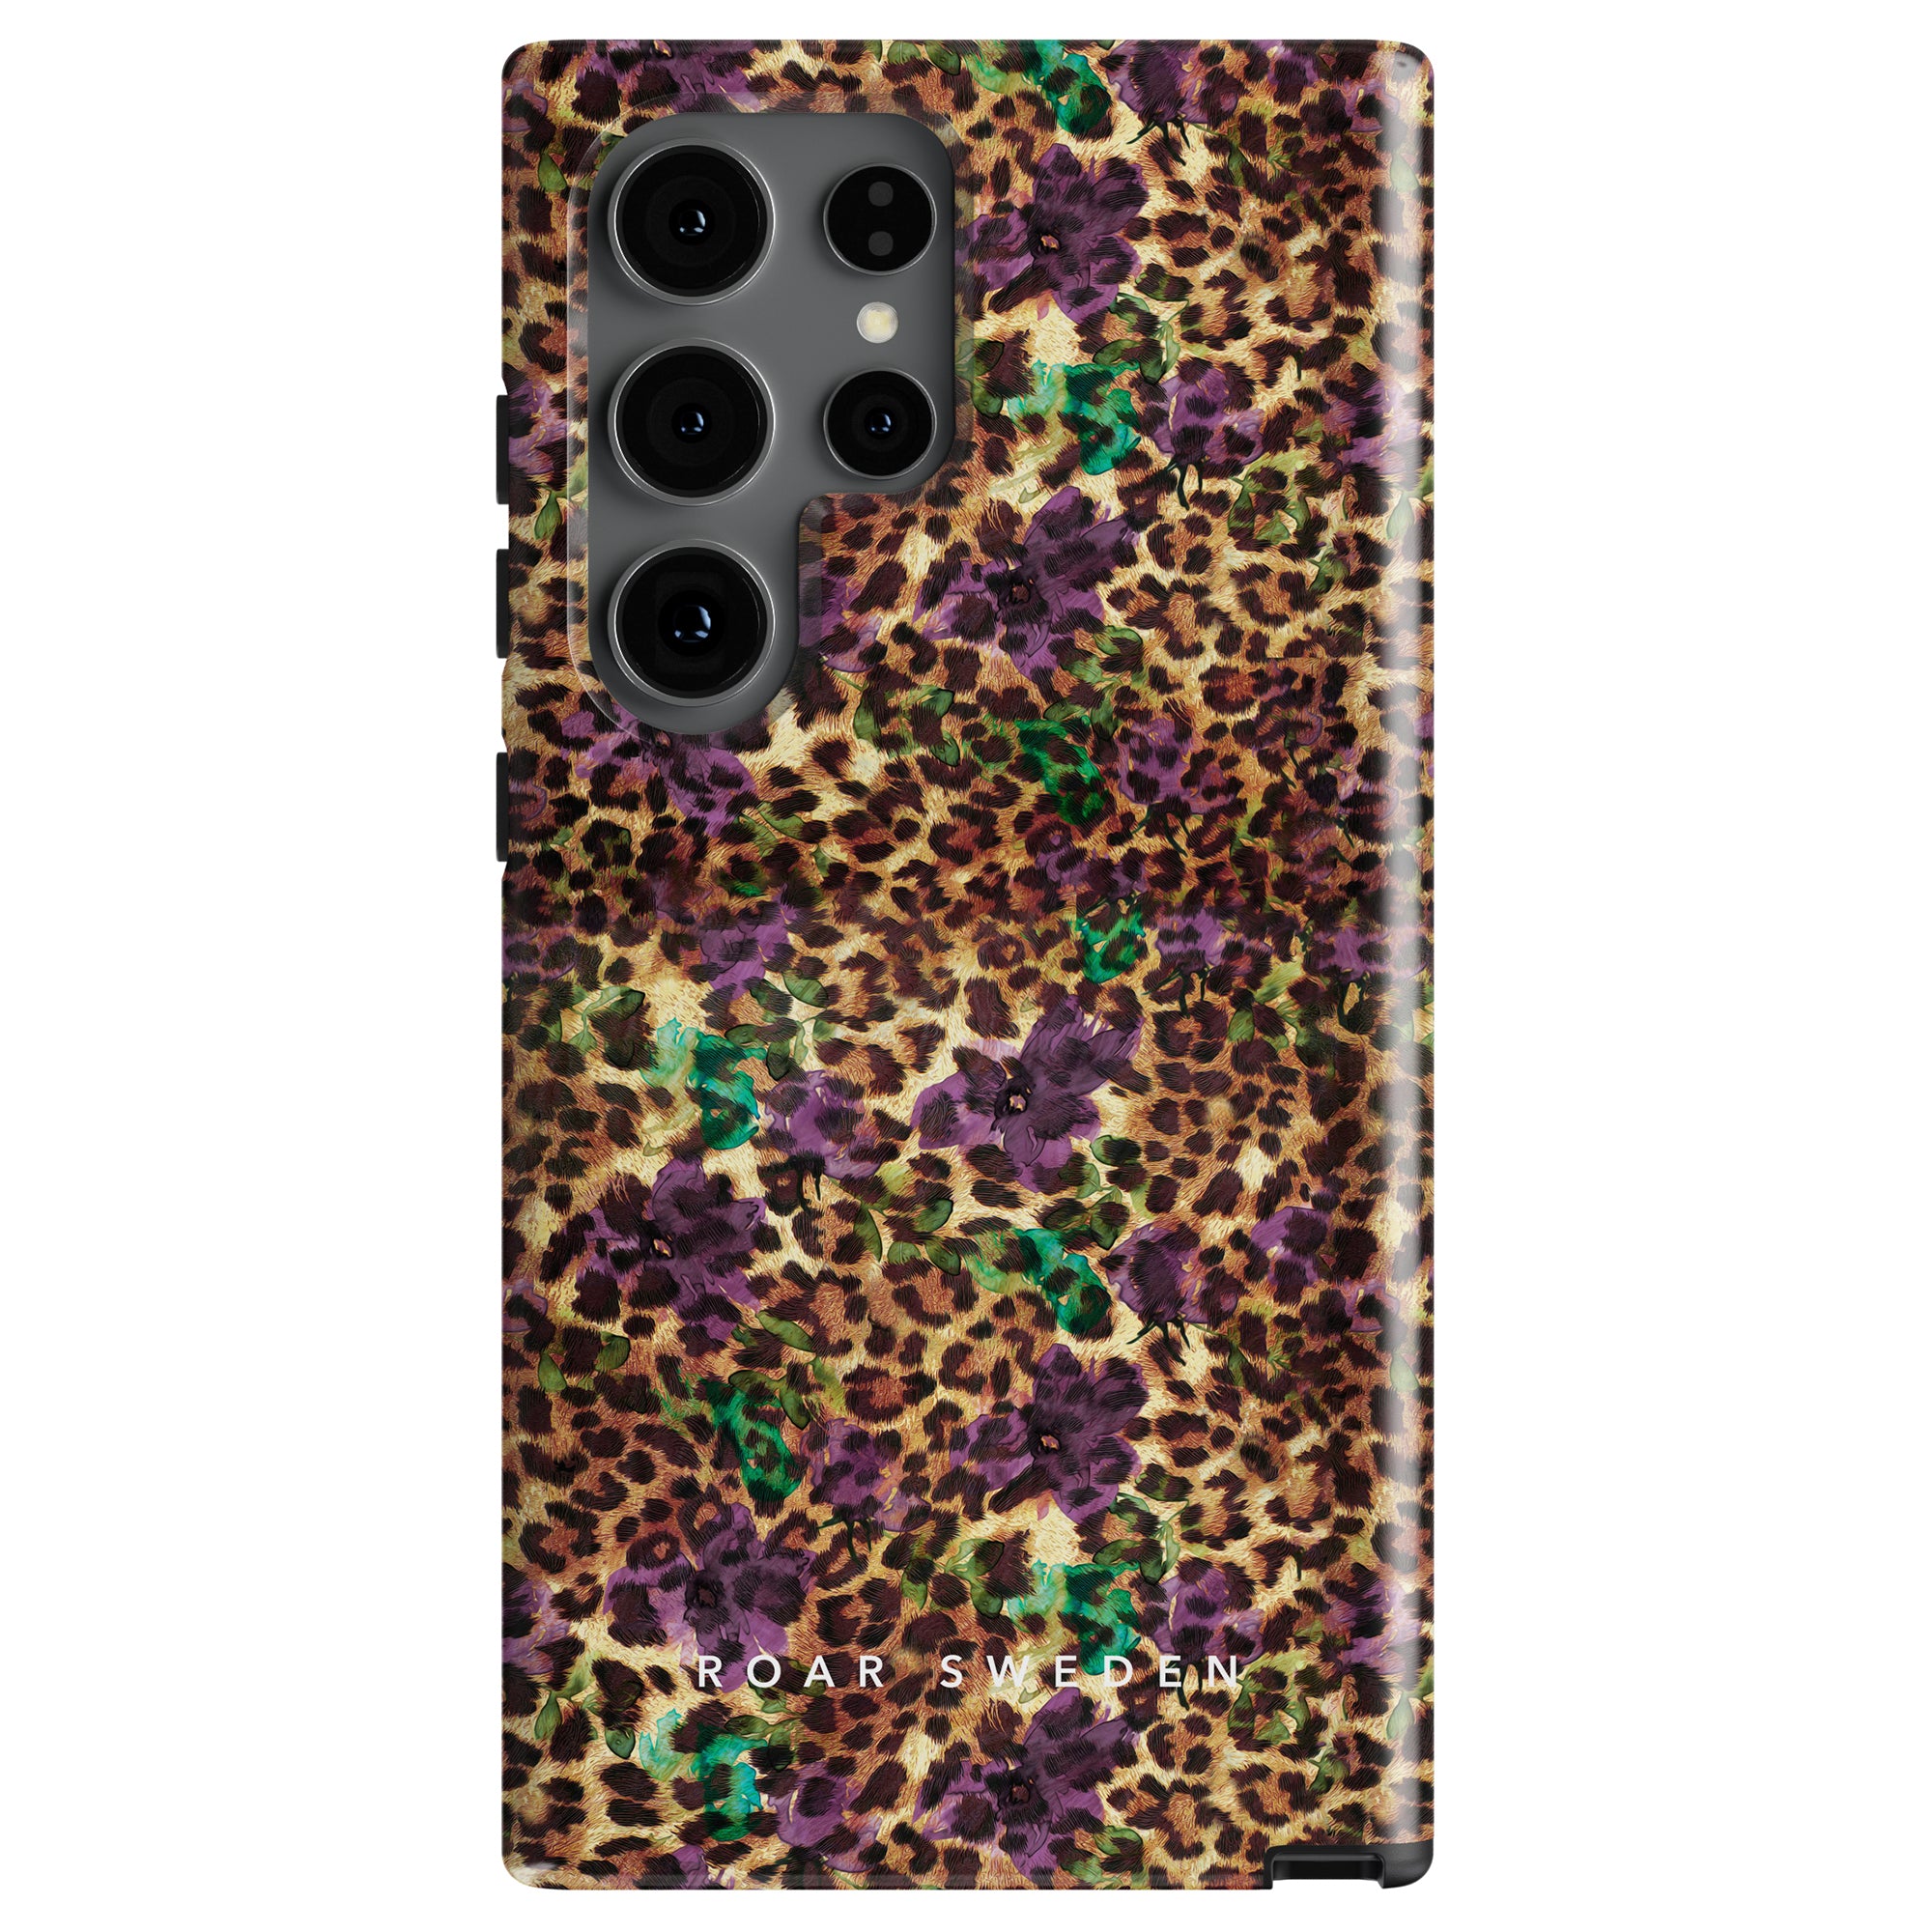 A smartphone with a multi-lens camera and a Flower Leopard - Tough Case, featuring purple and green floral patterns. The reptåligt mobilskal also boasts an stötabsorberande inre lager for added protection. Text on the case reads "ROAR SWEDEN.